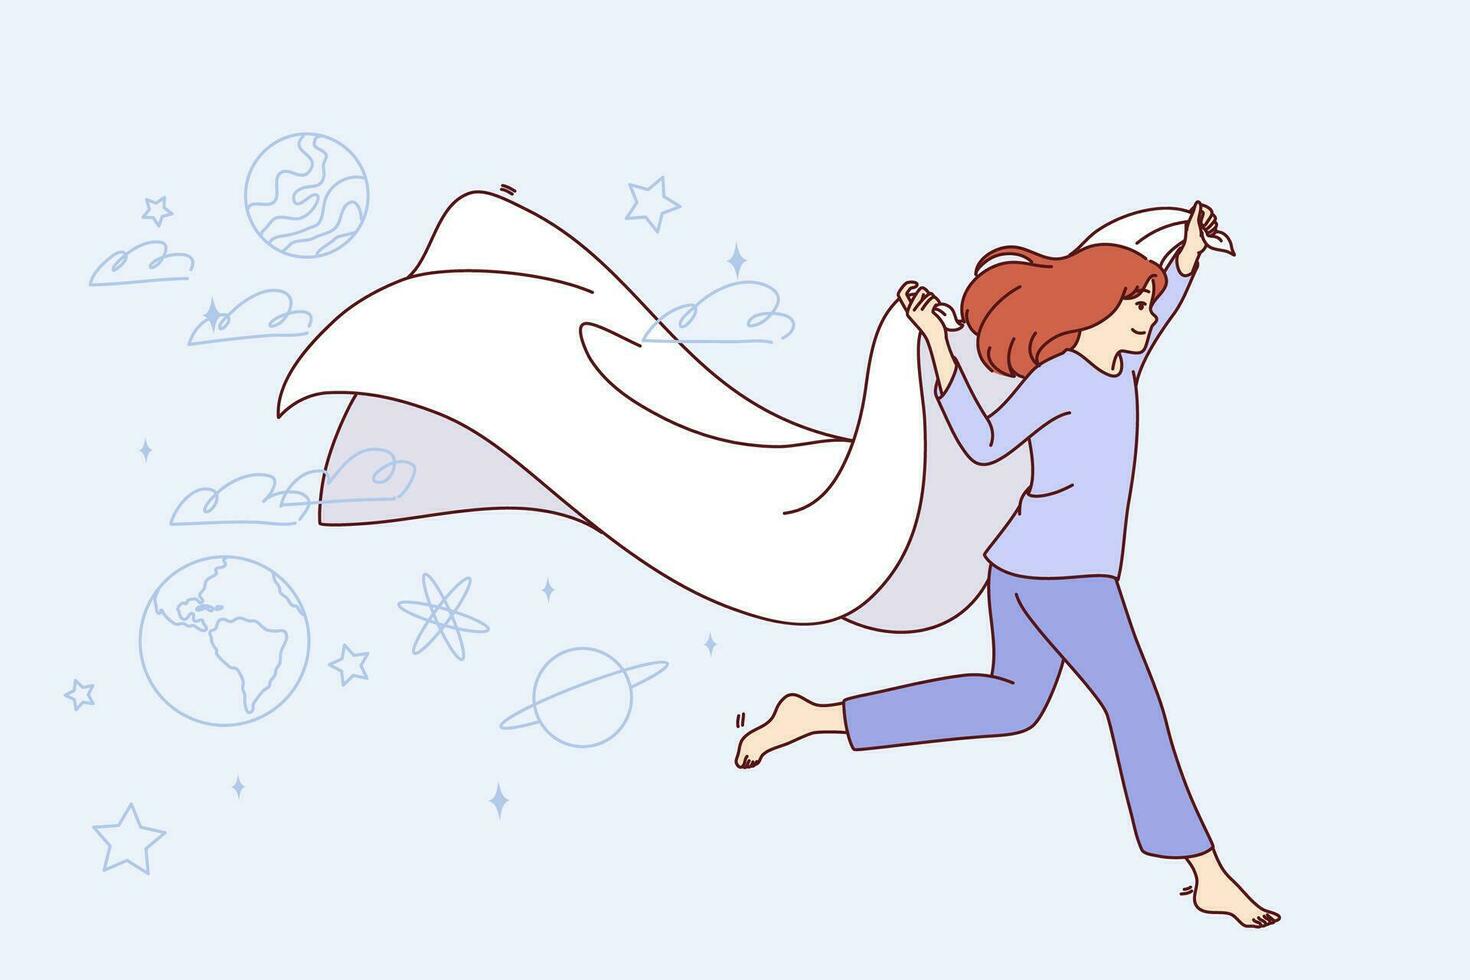 Little girl dreams while sleeps and runs with blanket in hands among space scenery. Carefree teen child sleeps and dreams of traveling galaxy or working in space exploration industry. vector